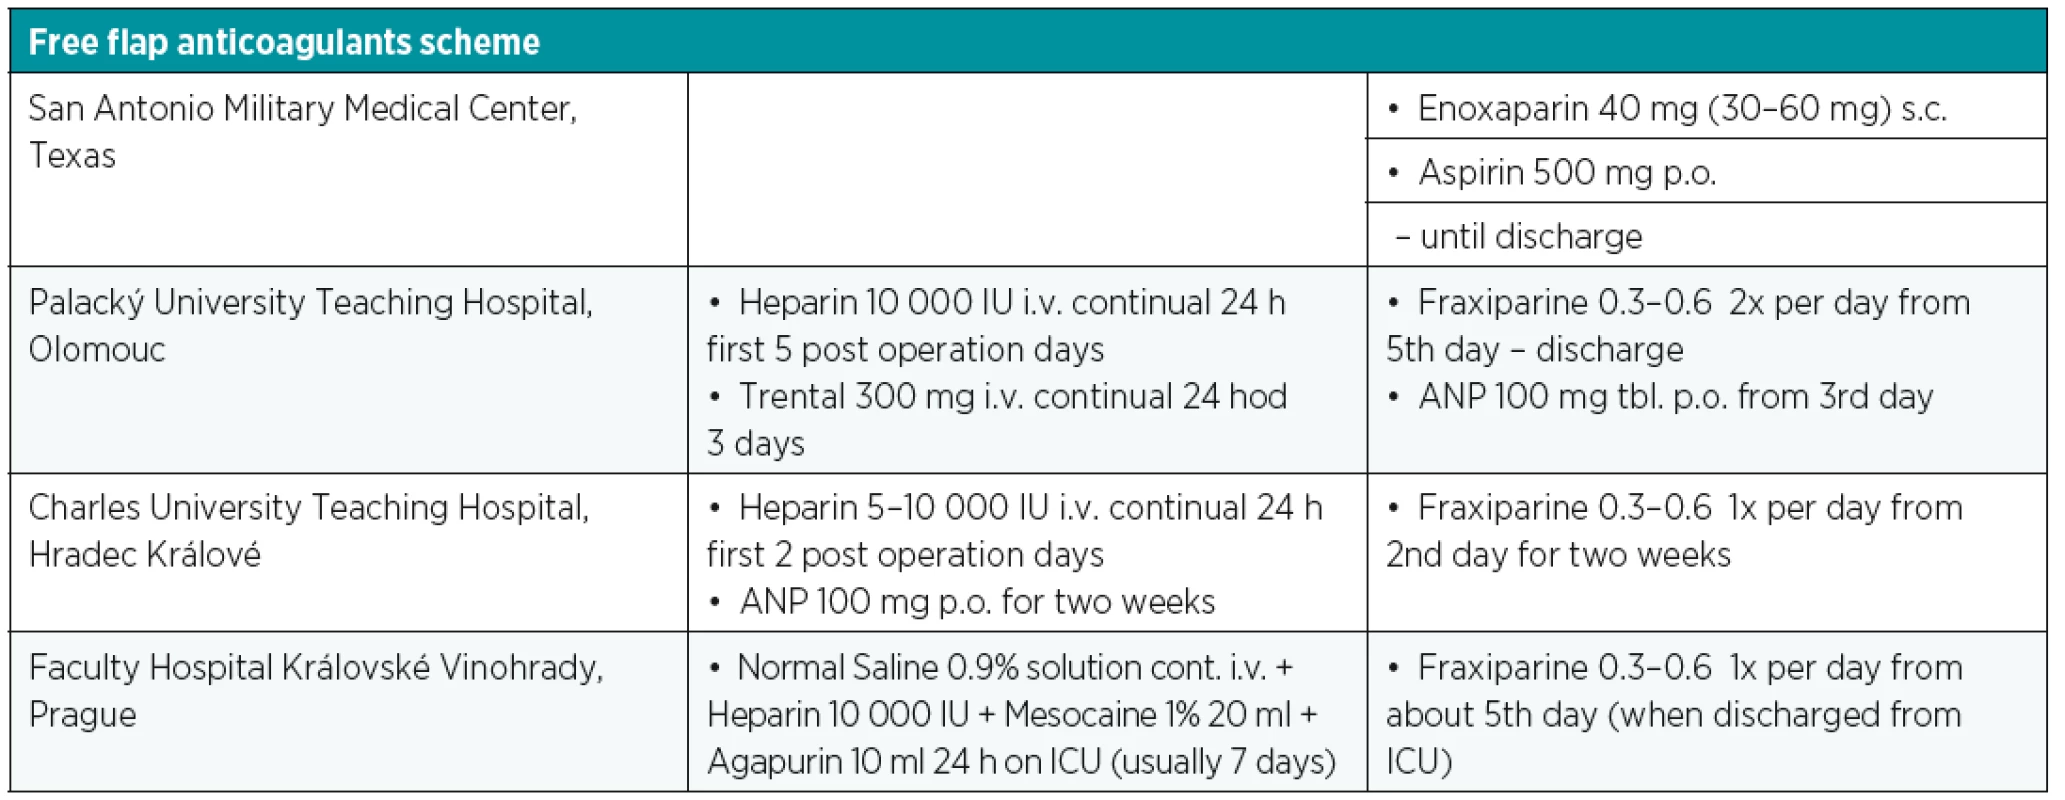 Possible free flap pharmacotherapy schedule